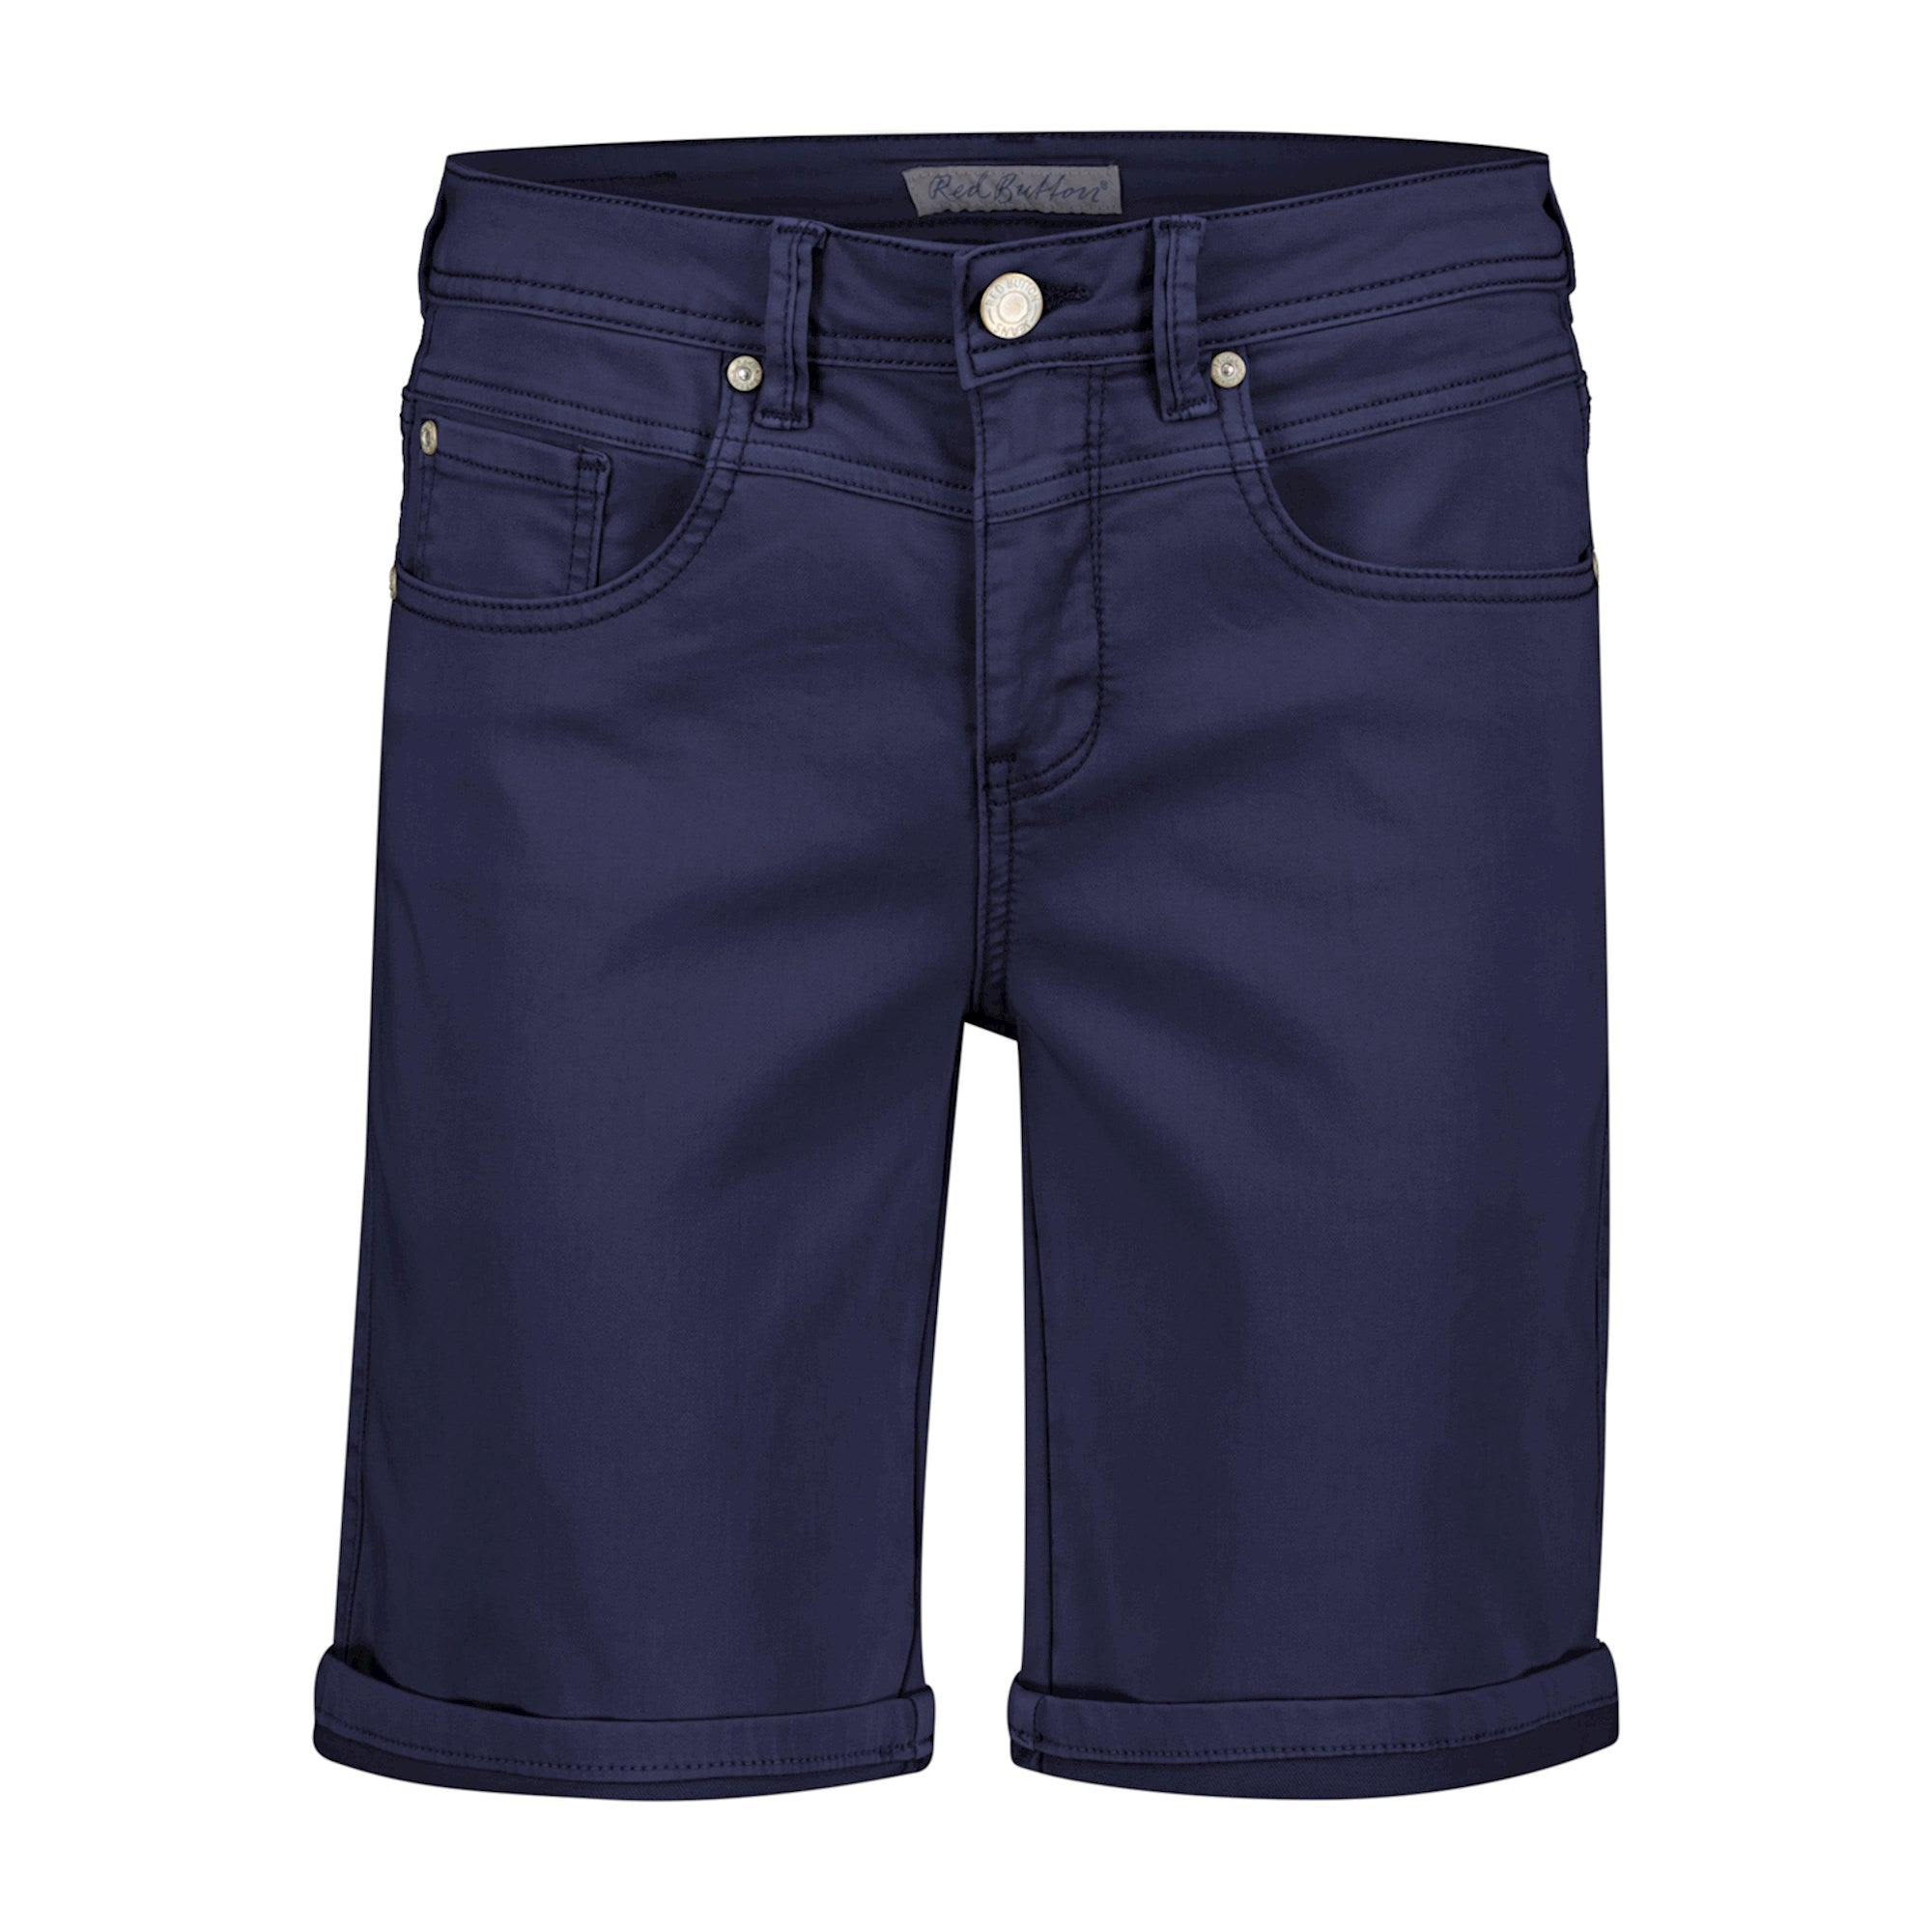 Relax Shorts in Navy